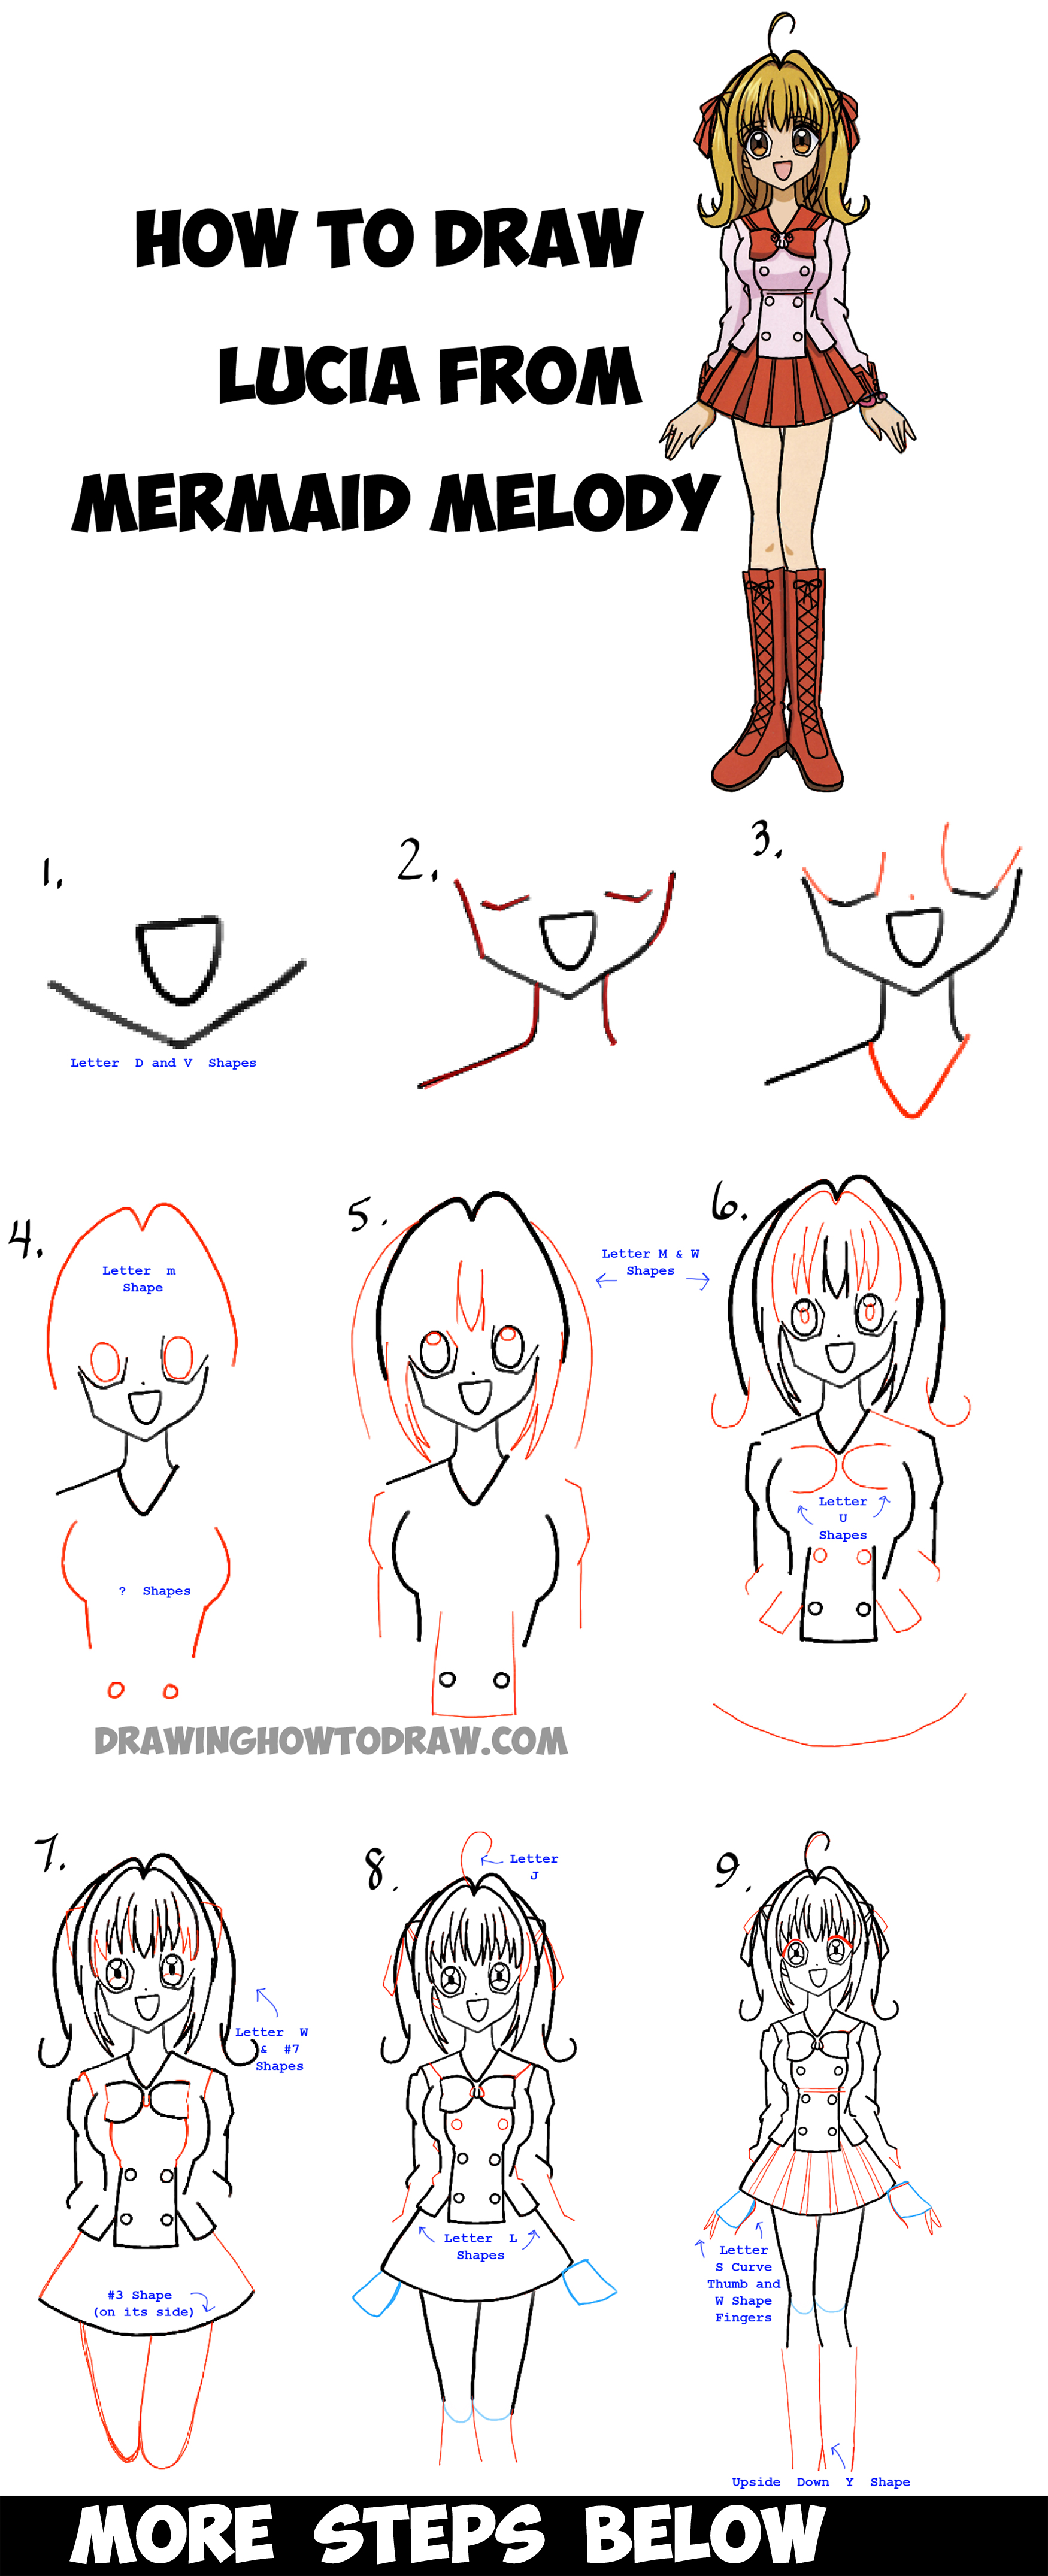 Learn How to Draw Lucia Nanami from Mermaid Melody - Easy Steps Drawing Manga Lesson for Kids